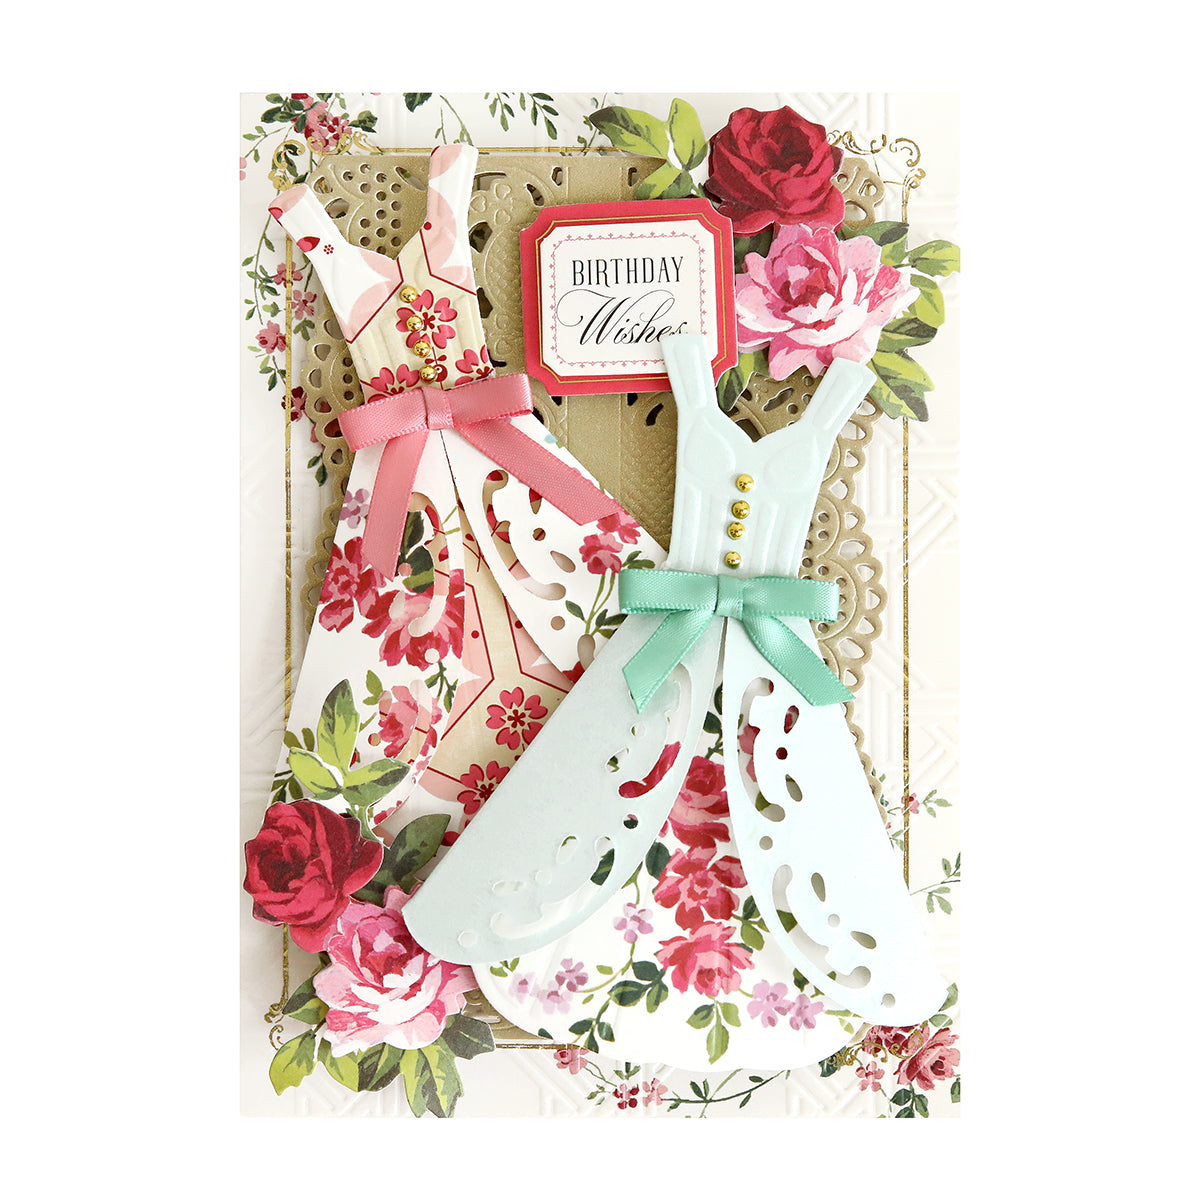 A card featuring Paper Dress Dies and roses.